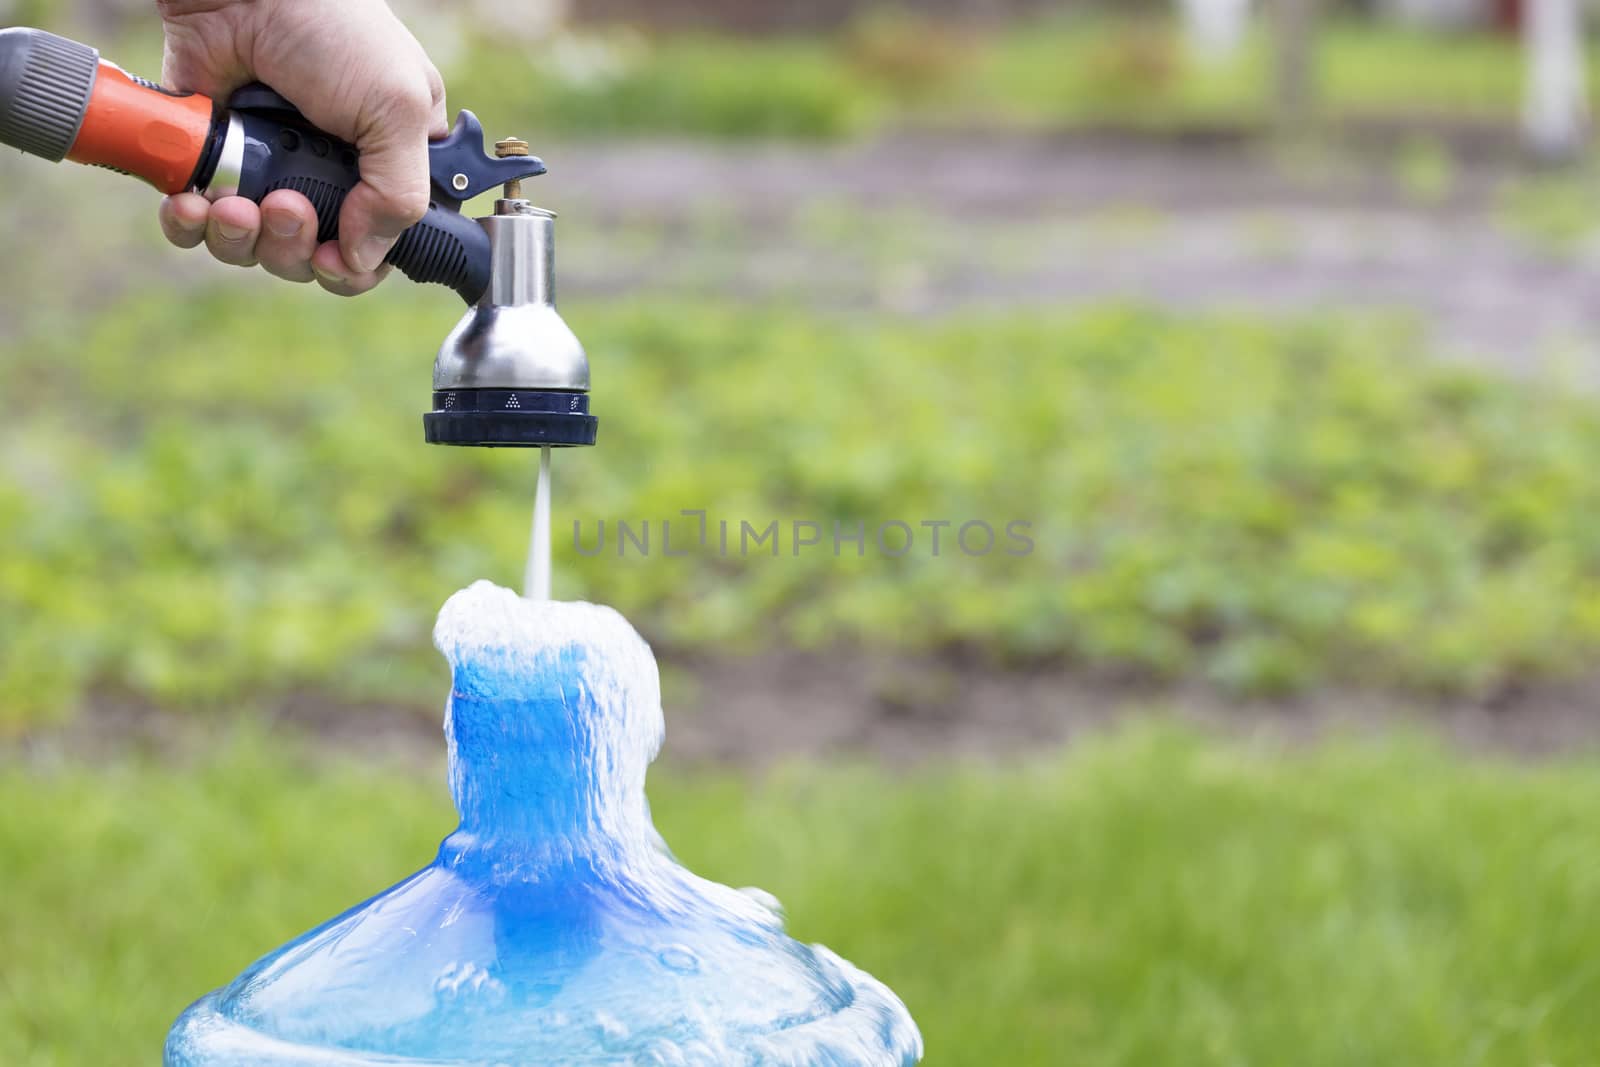 The gardener holds an irrigation sprinkler and collects clean water in a blue bottle against a blurred bright green grass.